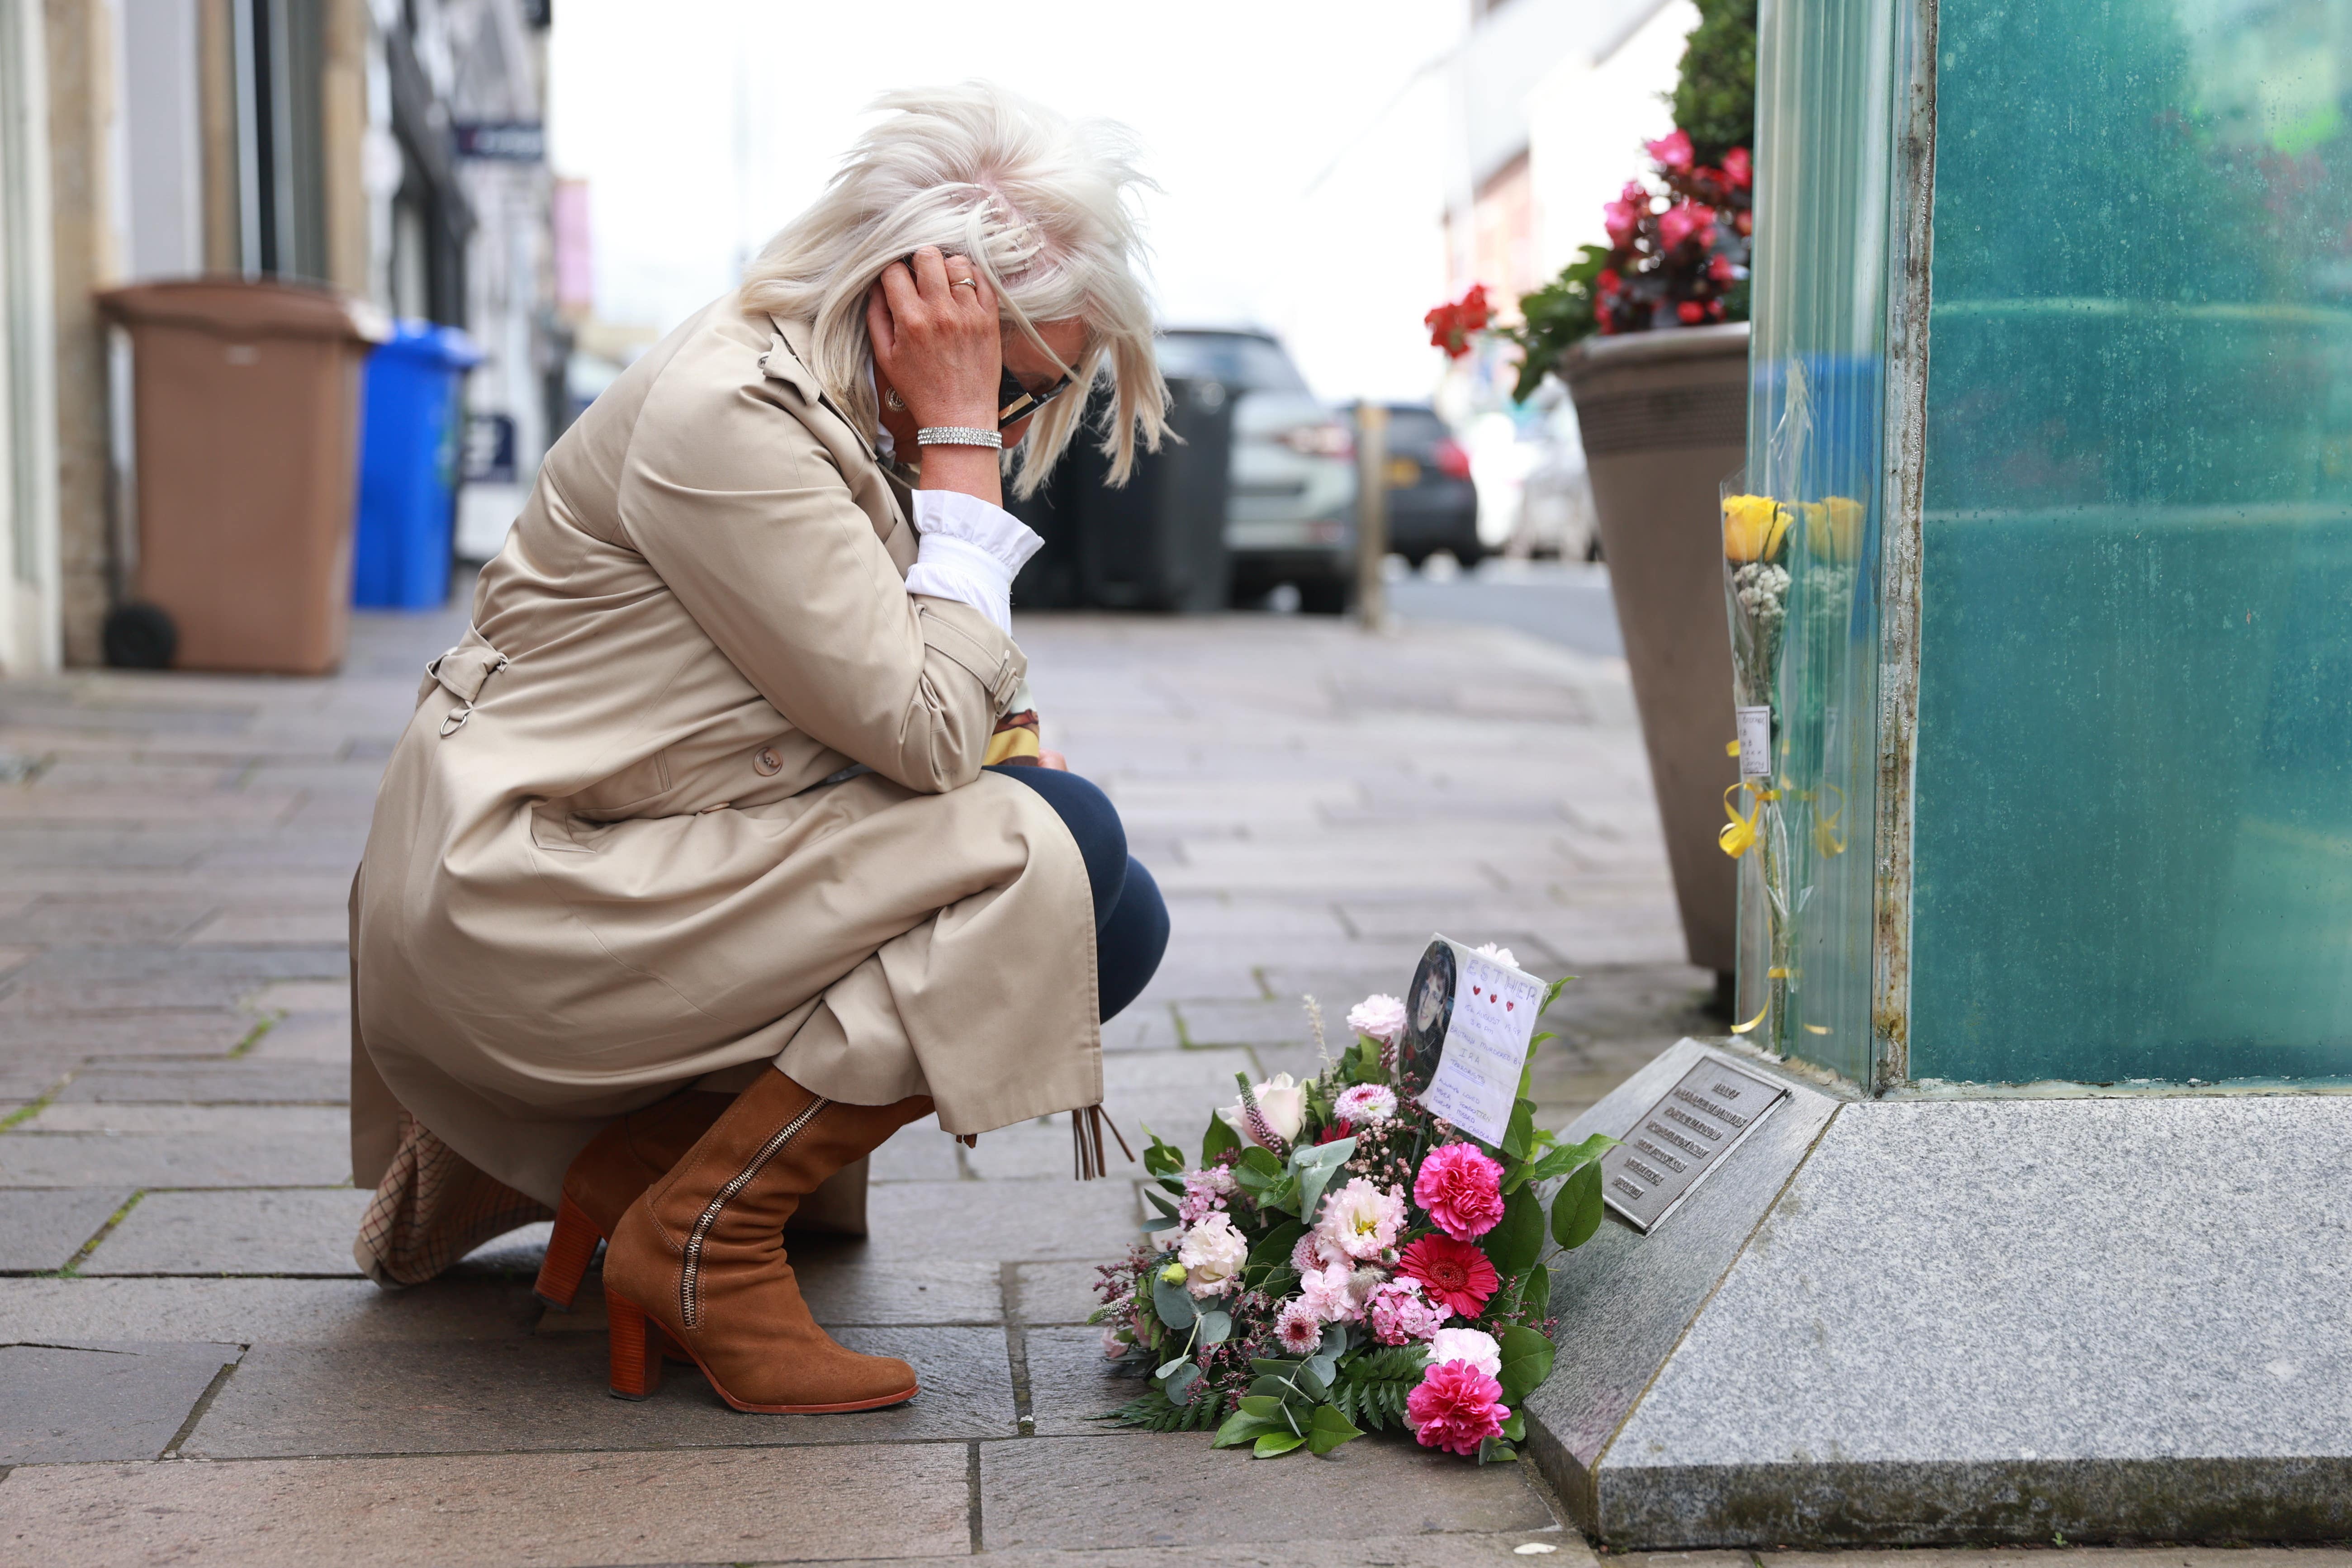 Caroline Martin, sister of Esther Gibson who died in the Omagh bombing, lays flowers at the site of the bombing to mark the 25th anniversary of the Real IRA atrocity (Liam McBurney/PA)